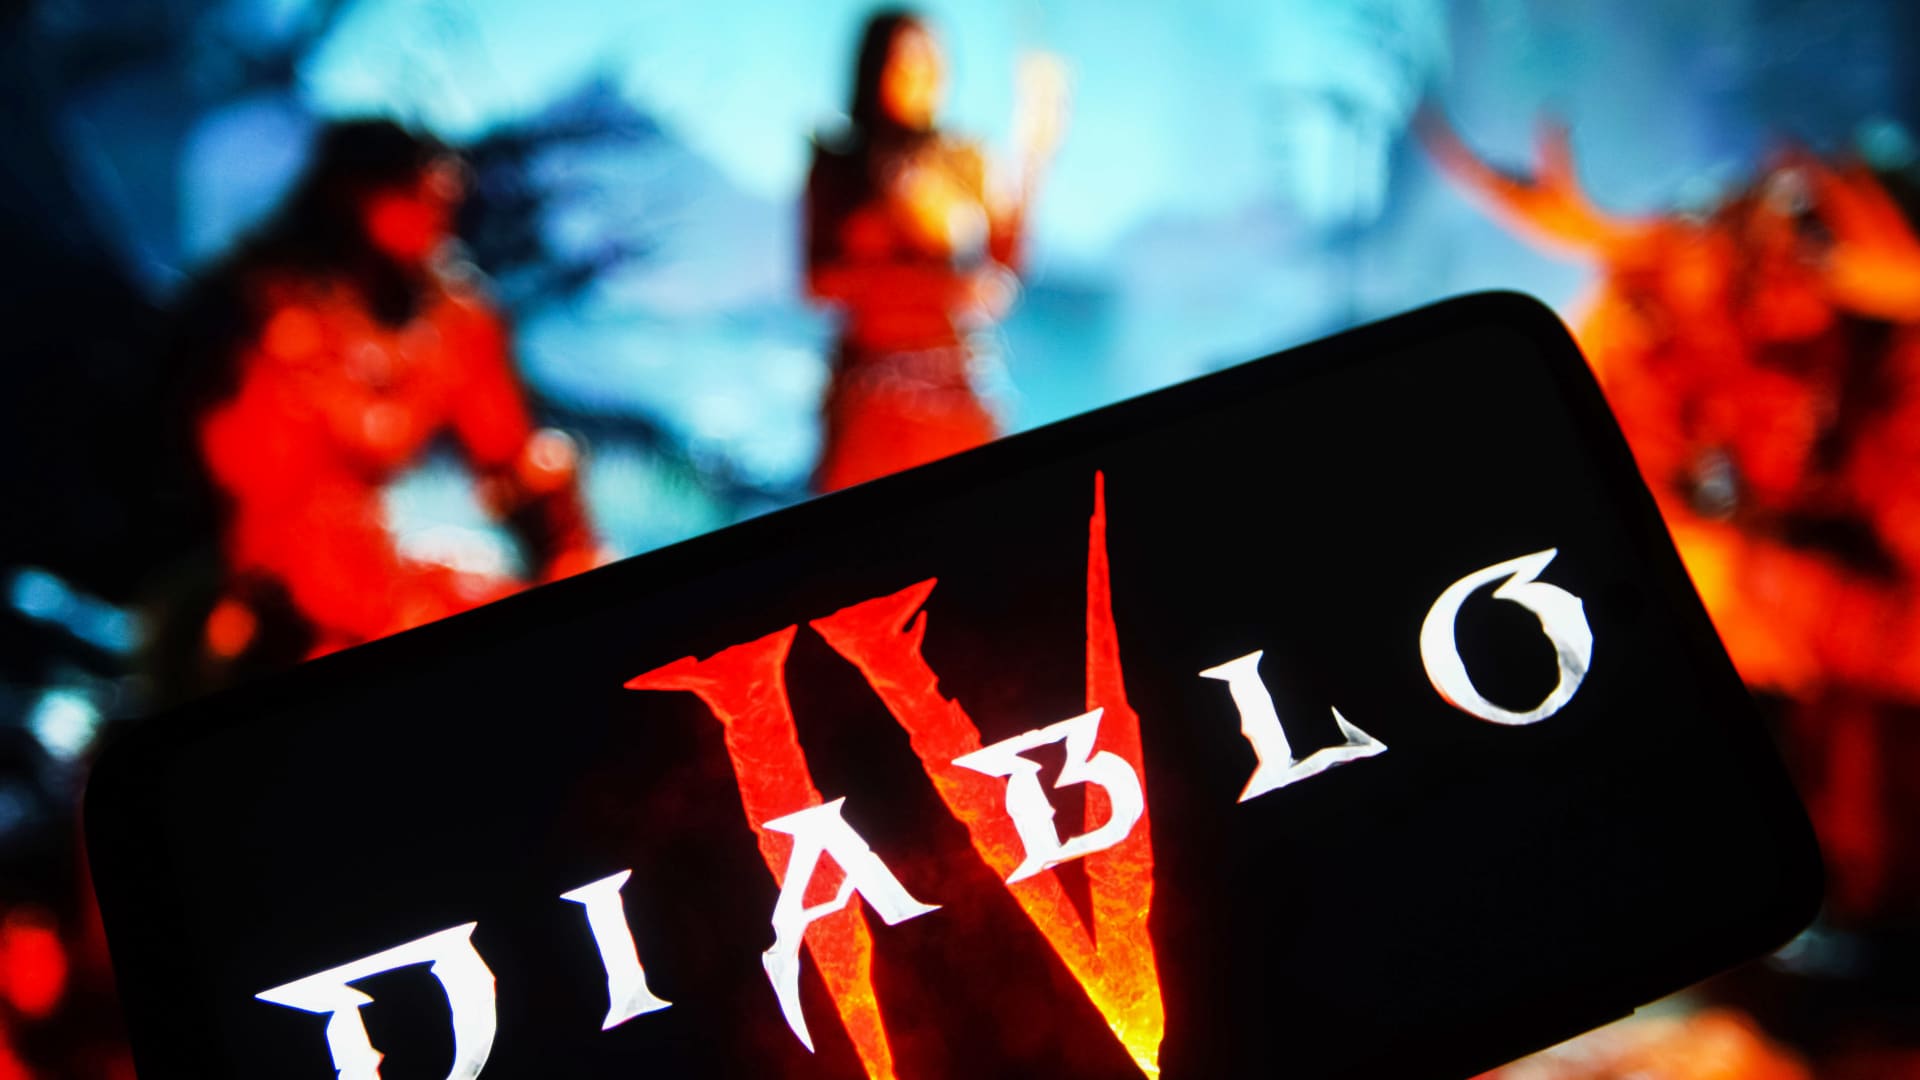 Diablo IV crosses 6 million in sales in five days, a record for Activision's Blizzard